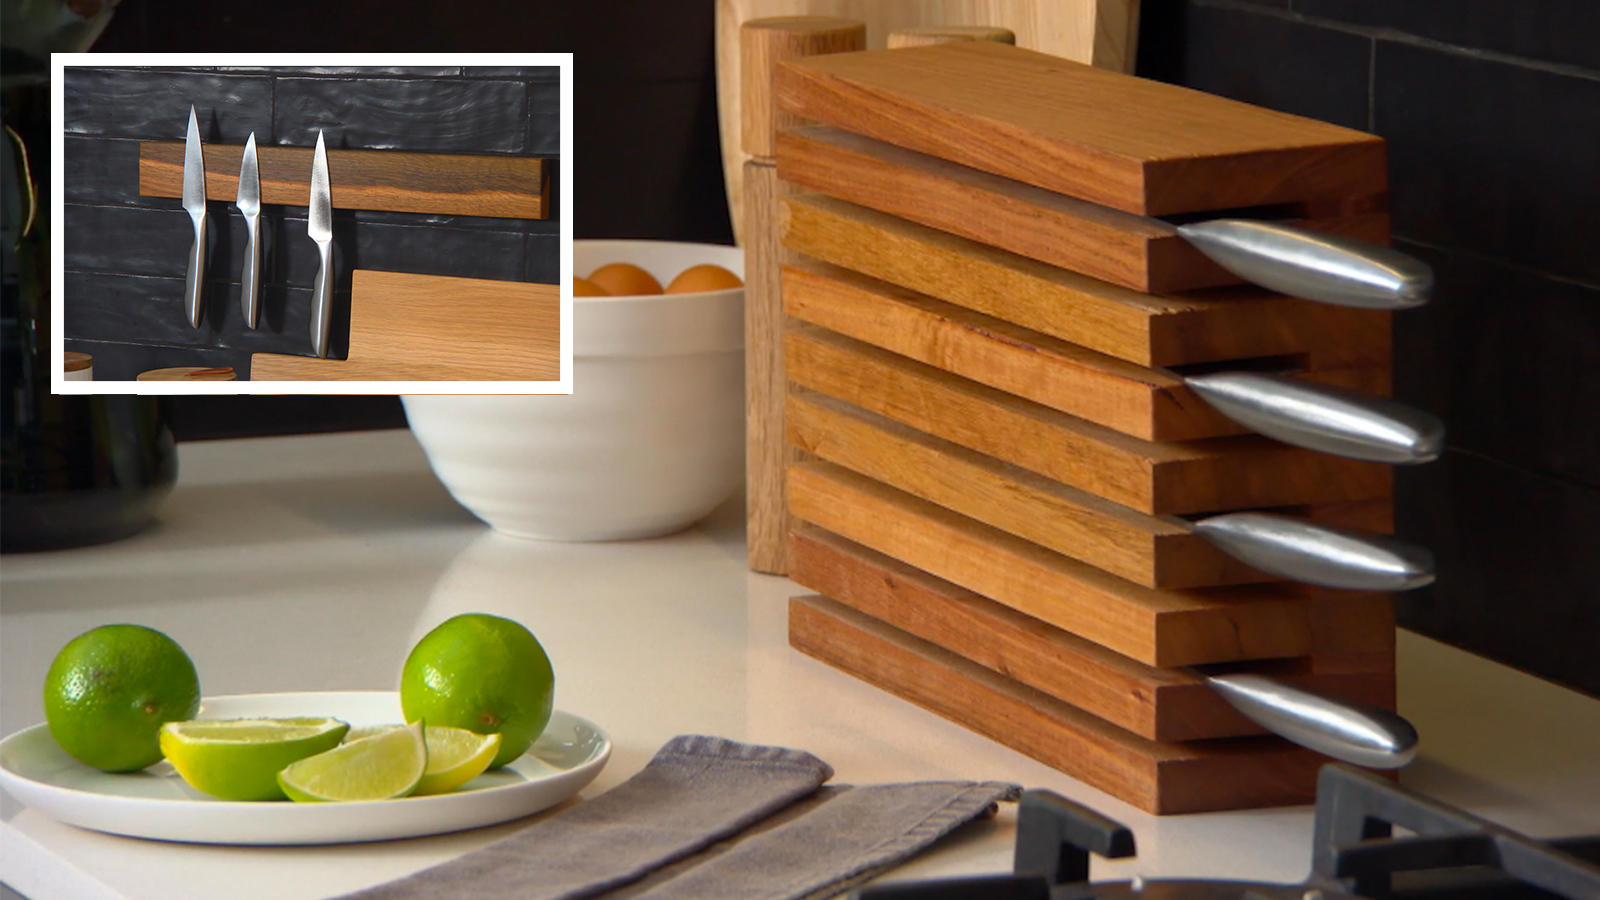 How To Give A Kitchen Knife Block Farmhouse Style - Interior Frugalista